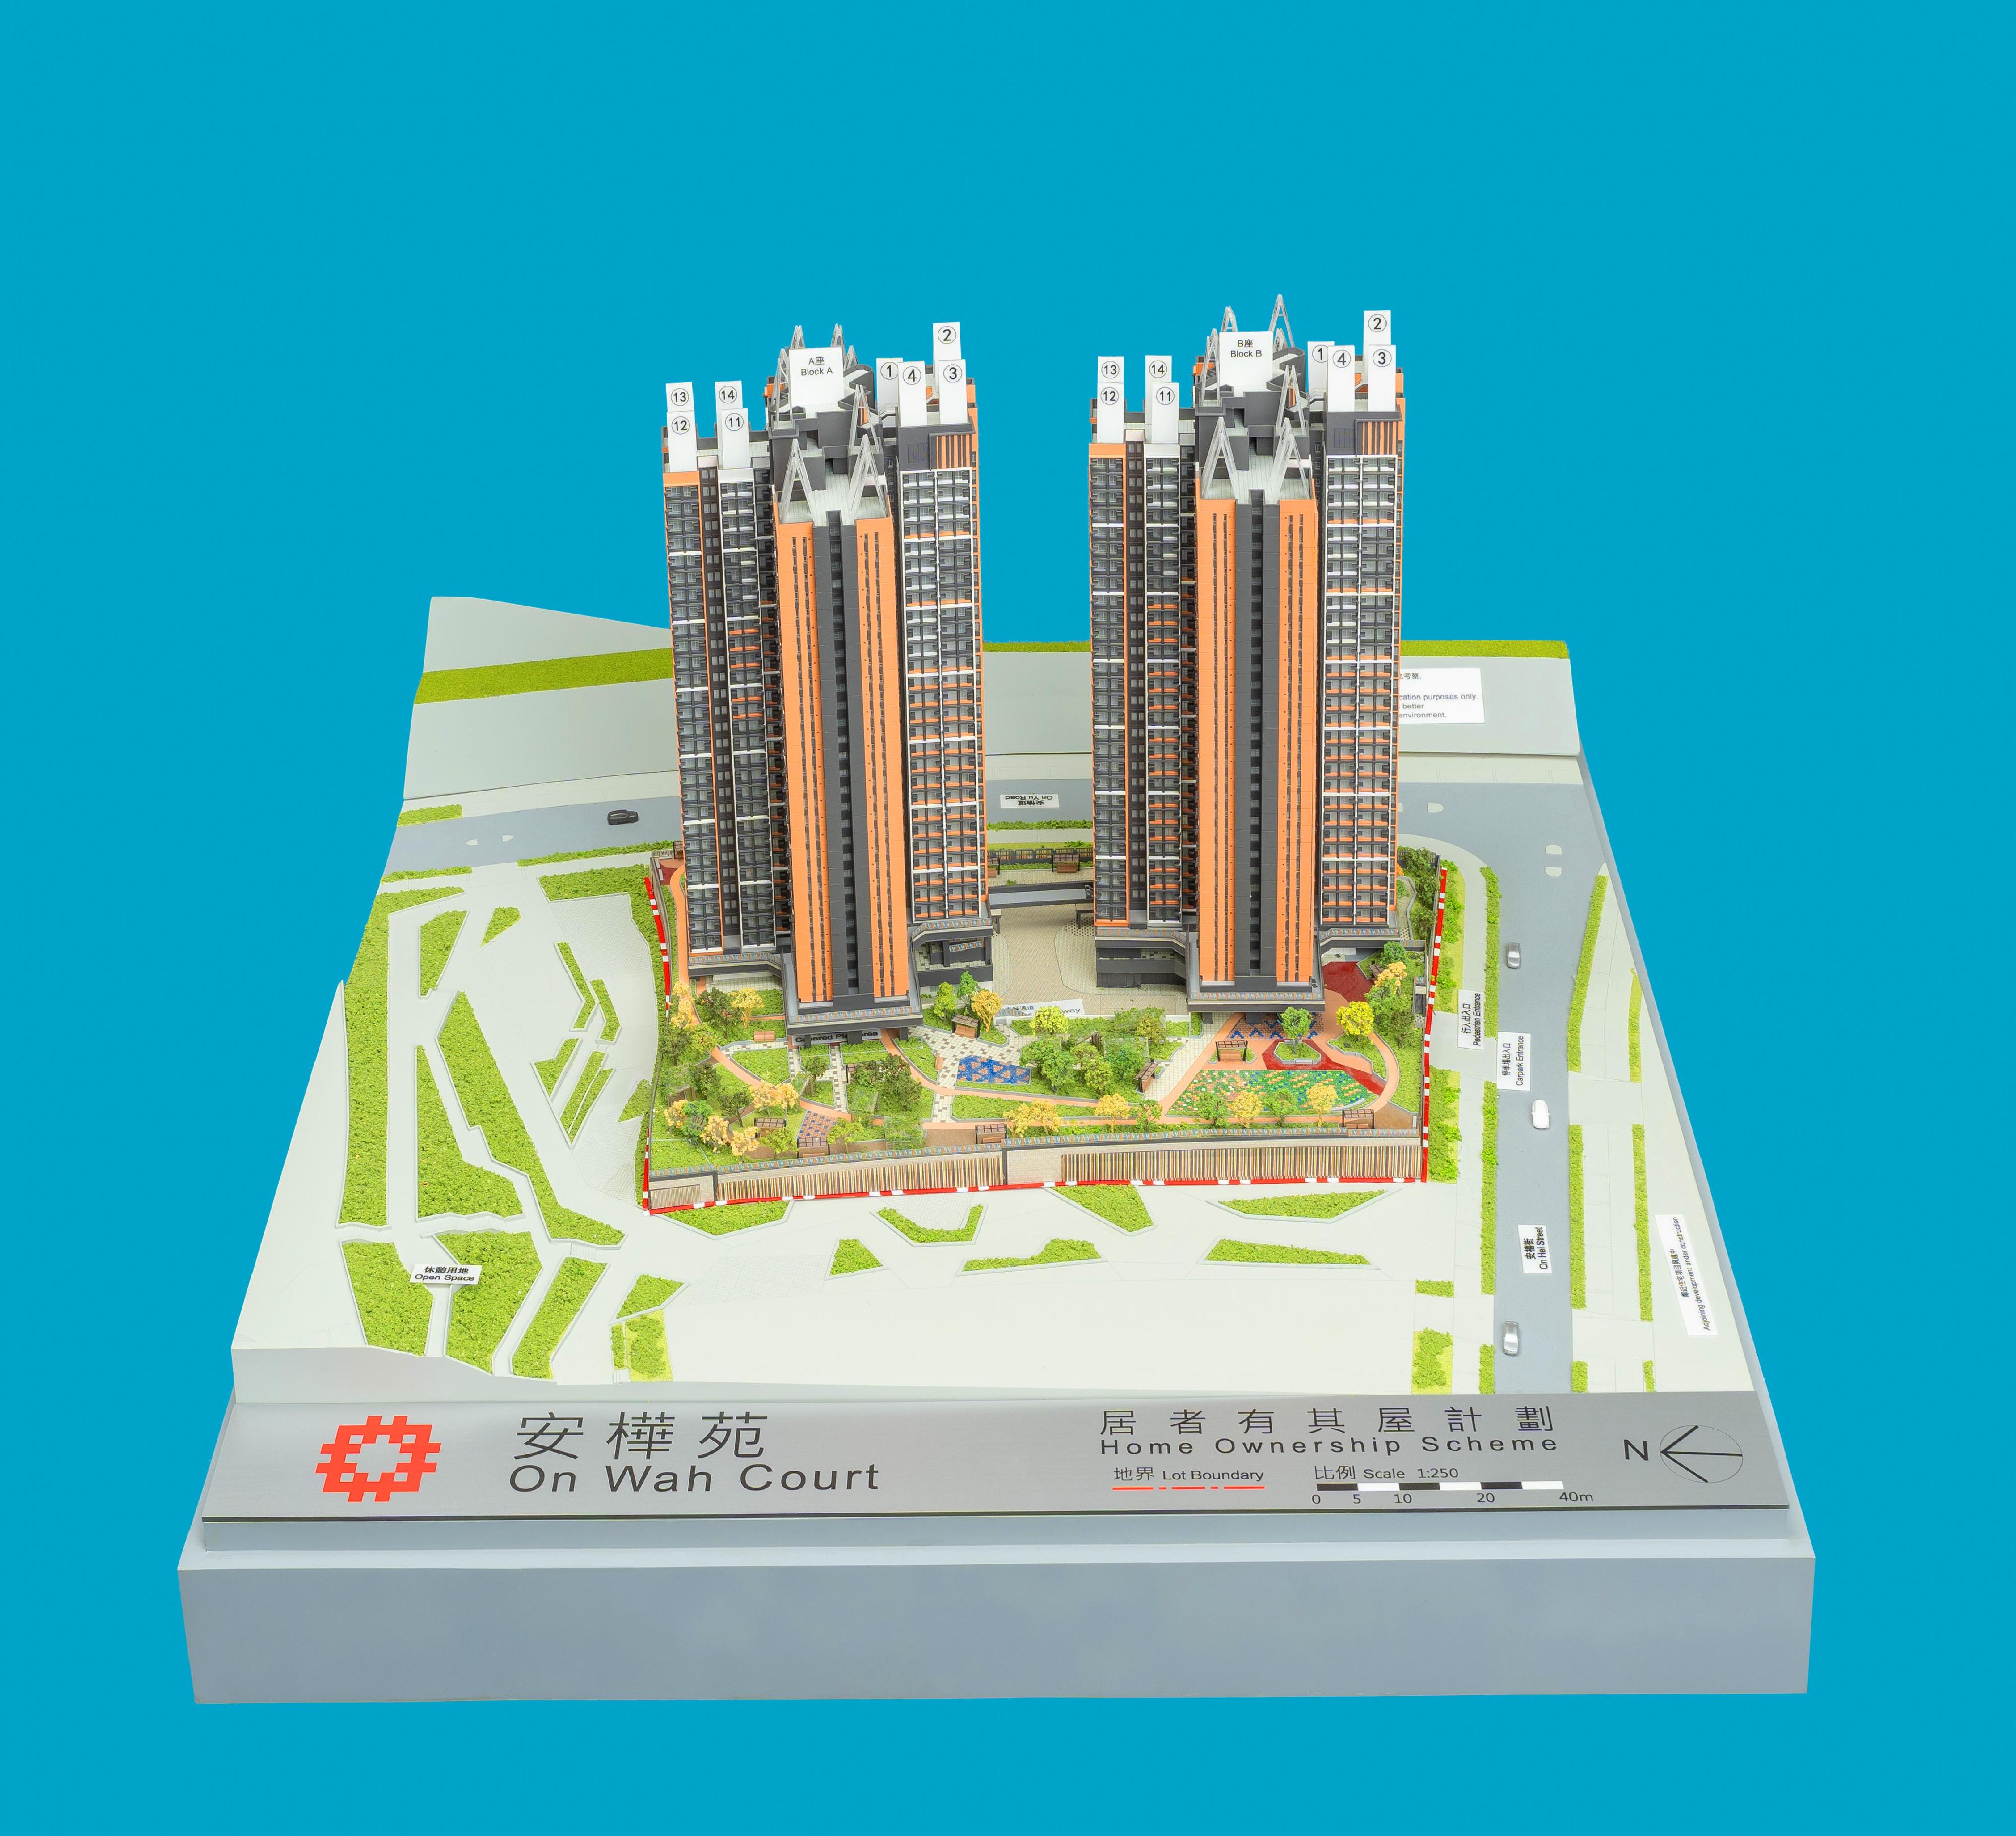 Applications for purchase under the Sale of Home Ownership Scheme Flats 2023 will start on July 31. Photo shows a model of On Wah Court, a new development project under the scheme.





